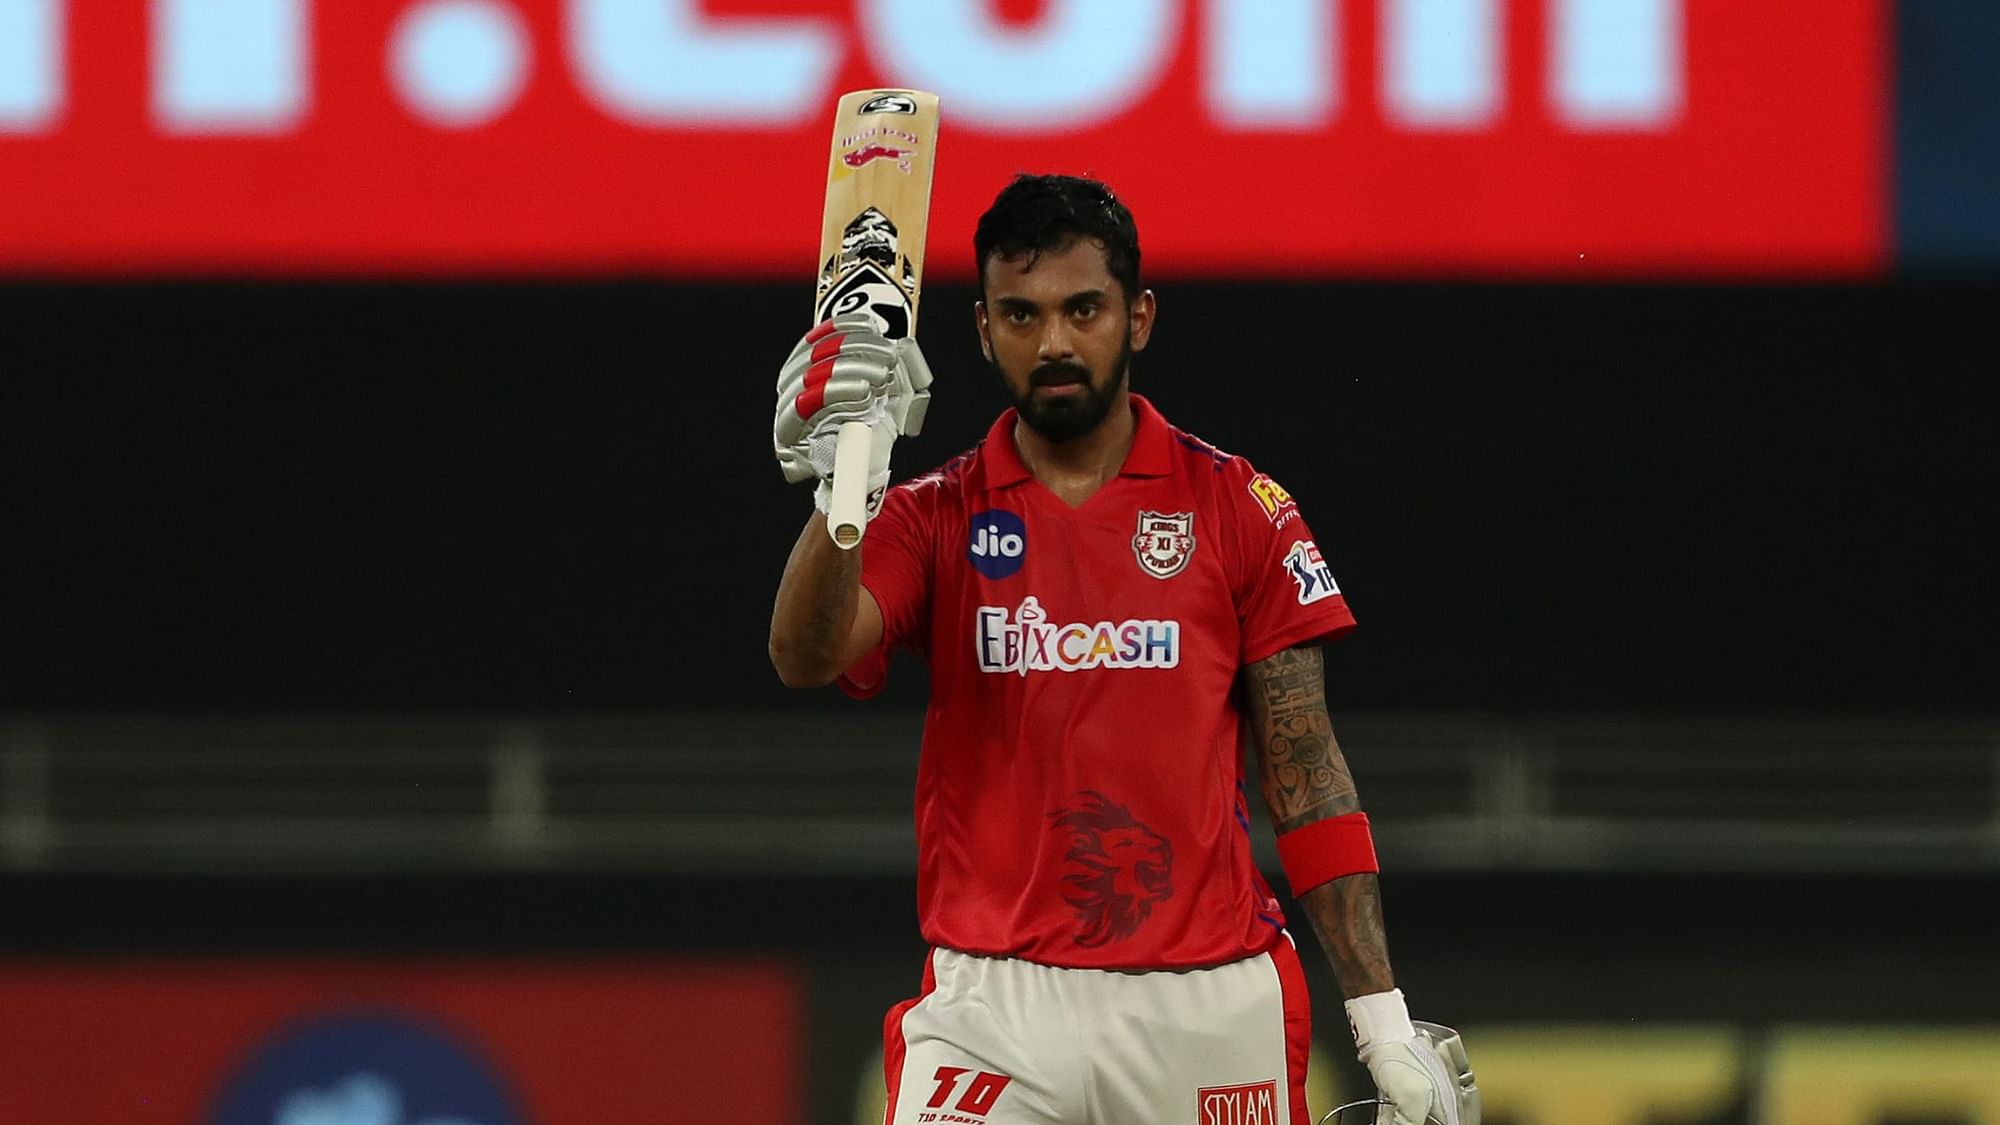 Kings XI Punjab (KXIP) captain KL Rahul leads the IPL 2020 run-getters’ list with 540 runs in the race for Orange Cap.